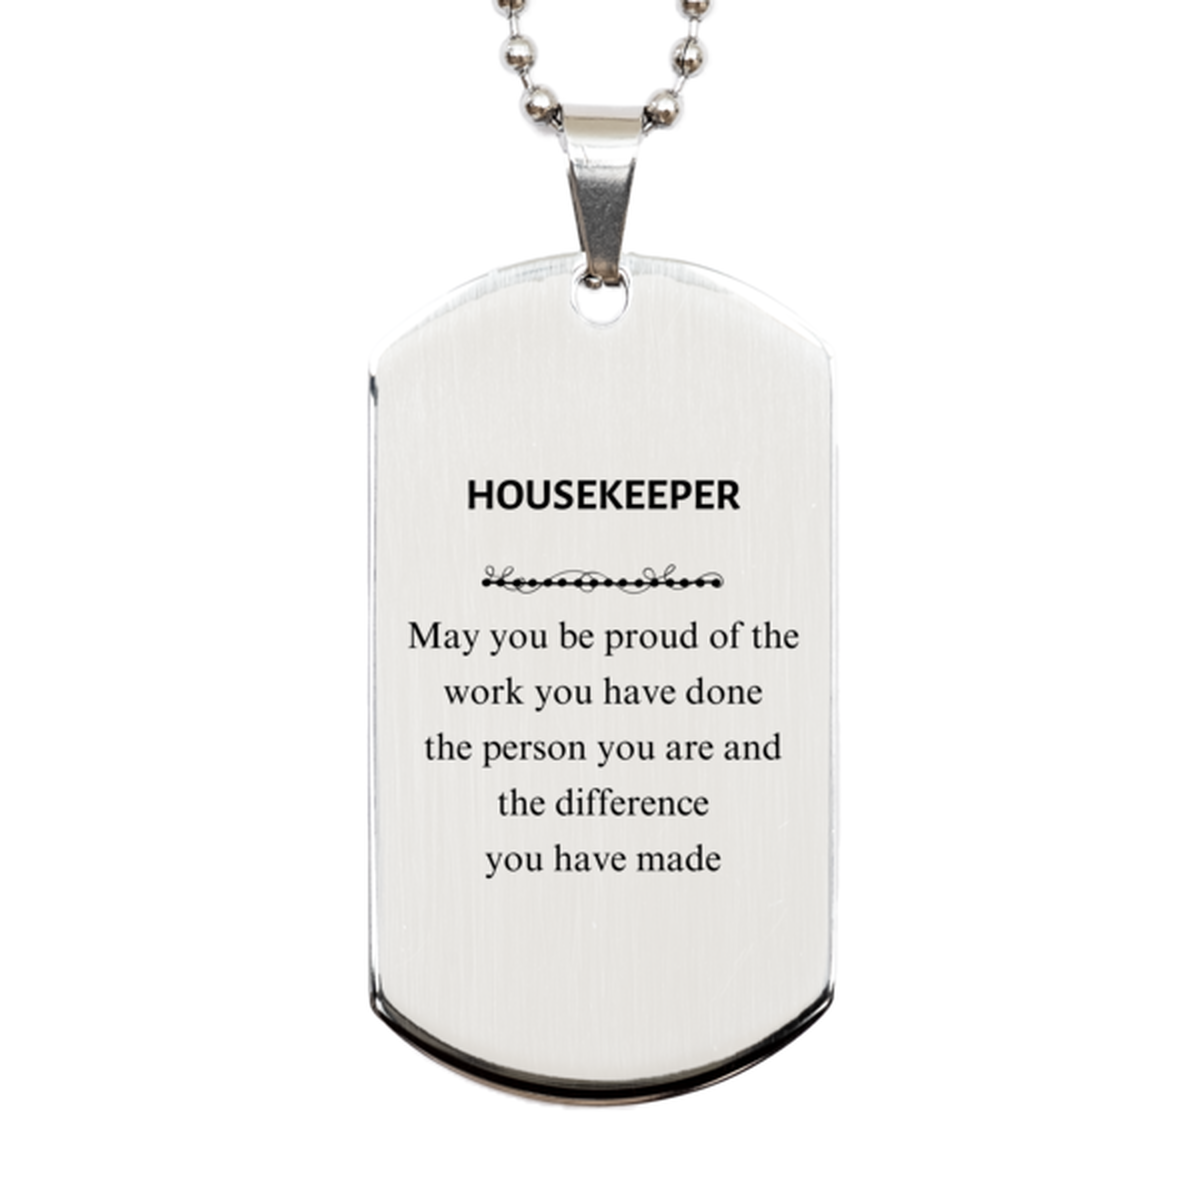 Housekeeper May you be proud of the work you have done, Retirement Housekeeper Silver Dog Tag for Colleague Appreciation Gifts Amazing for Housekeeper